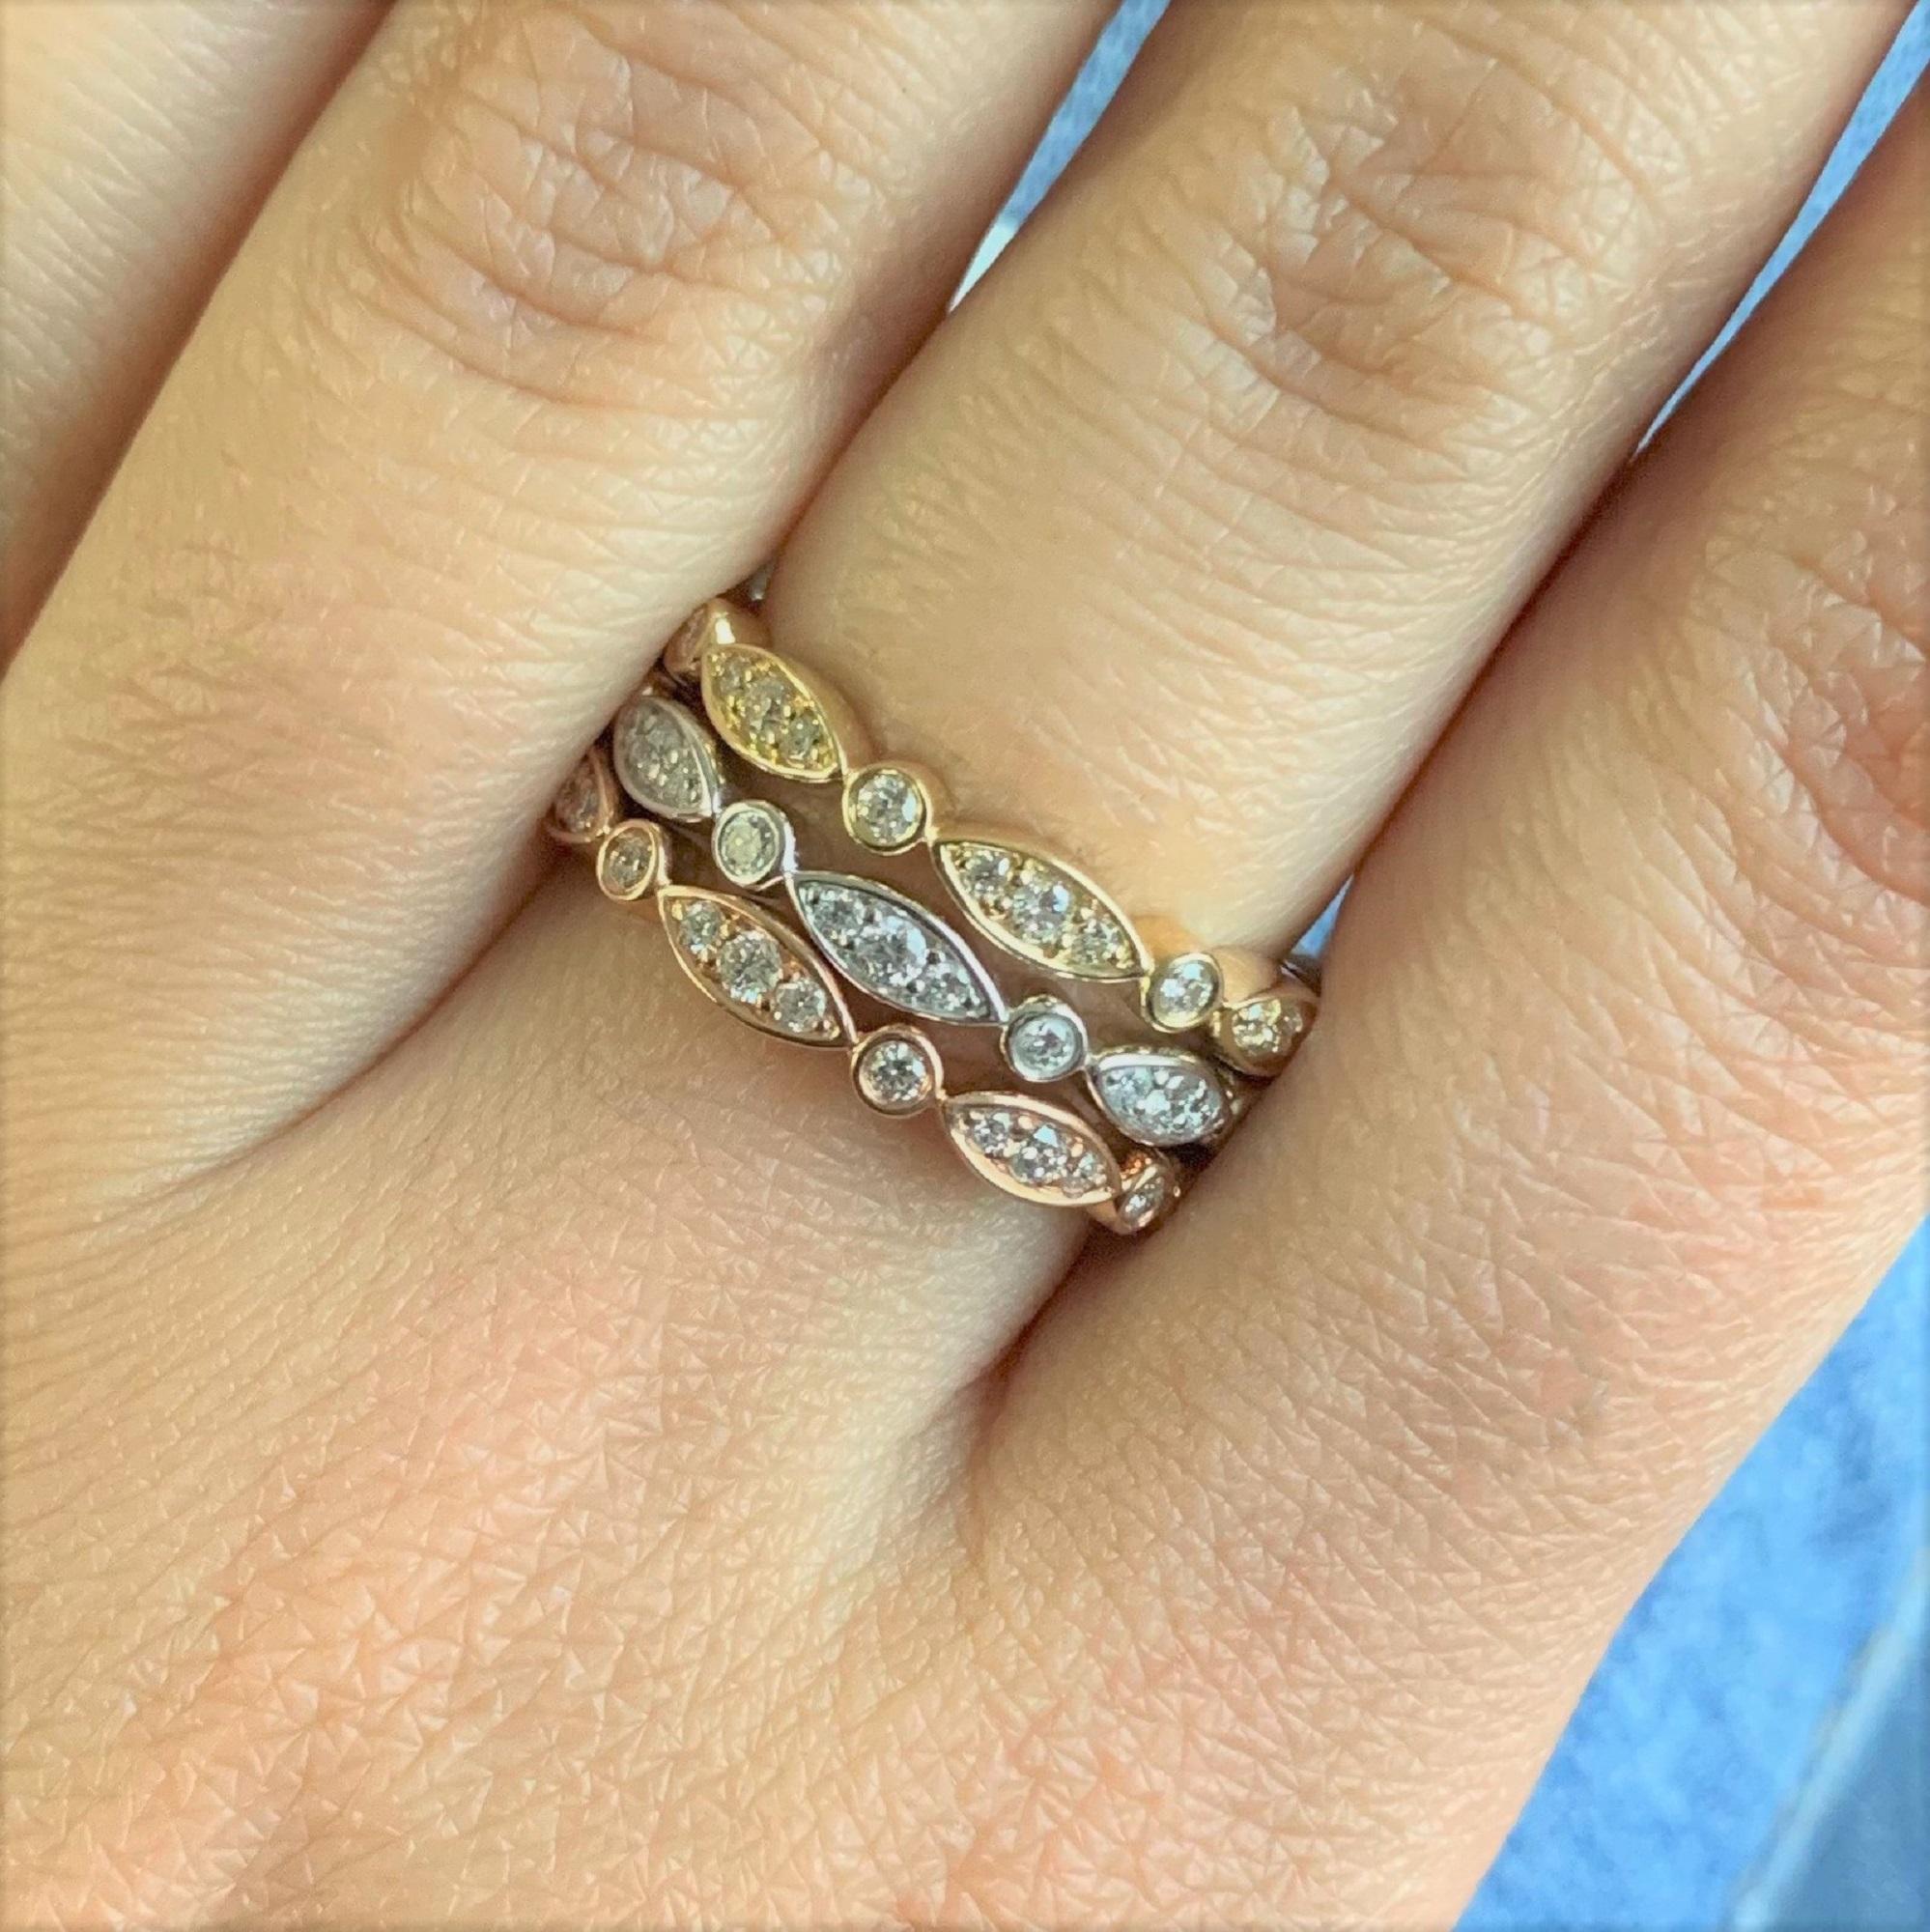 Tired of your predictable jewelry collection? Update your look with the classic elements of this elegant ring! 14k gold forms a dramatic shank that holds a dazzling collection of round diamonds in prong and bezel settings. The polished finish gives